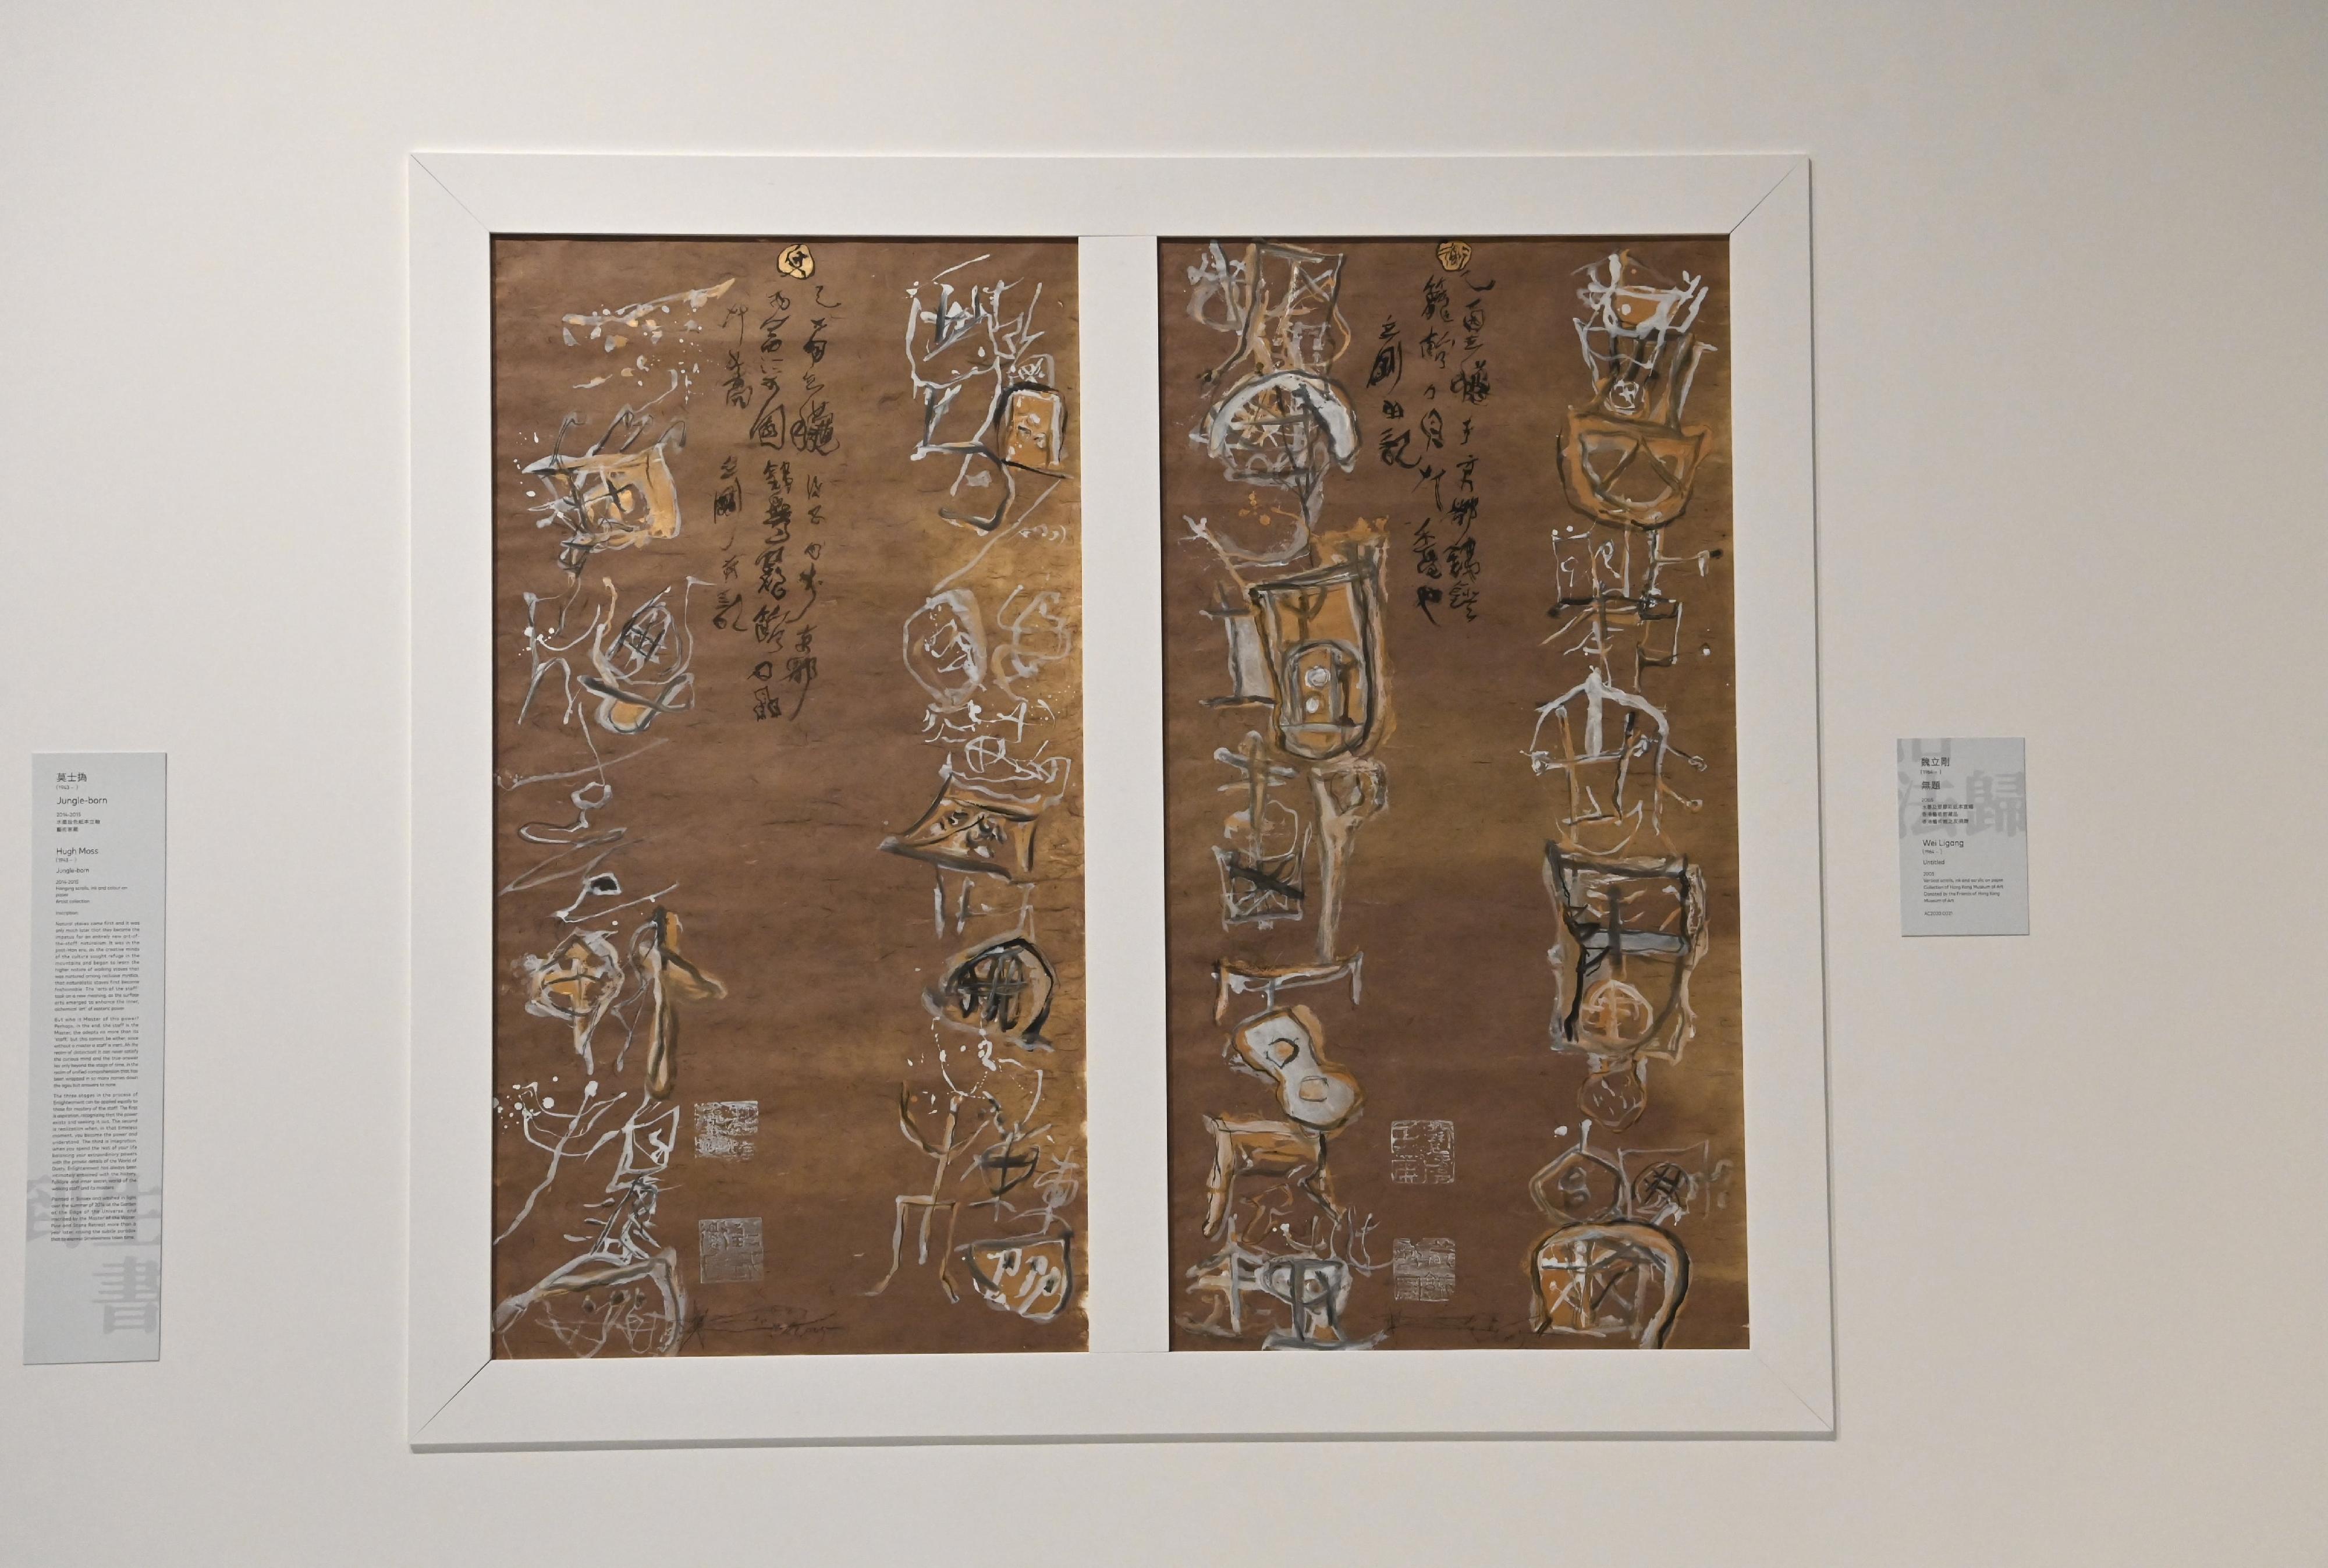 The "By the People: Creative Chinese Characters" exhibition will be staged from tomorrow (September 9) at the Hong Kong Museum of Art. Picture shows Chinese contemporary artist Wei Ligang's work "Untitled".